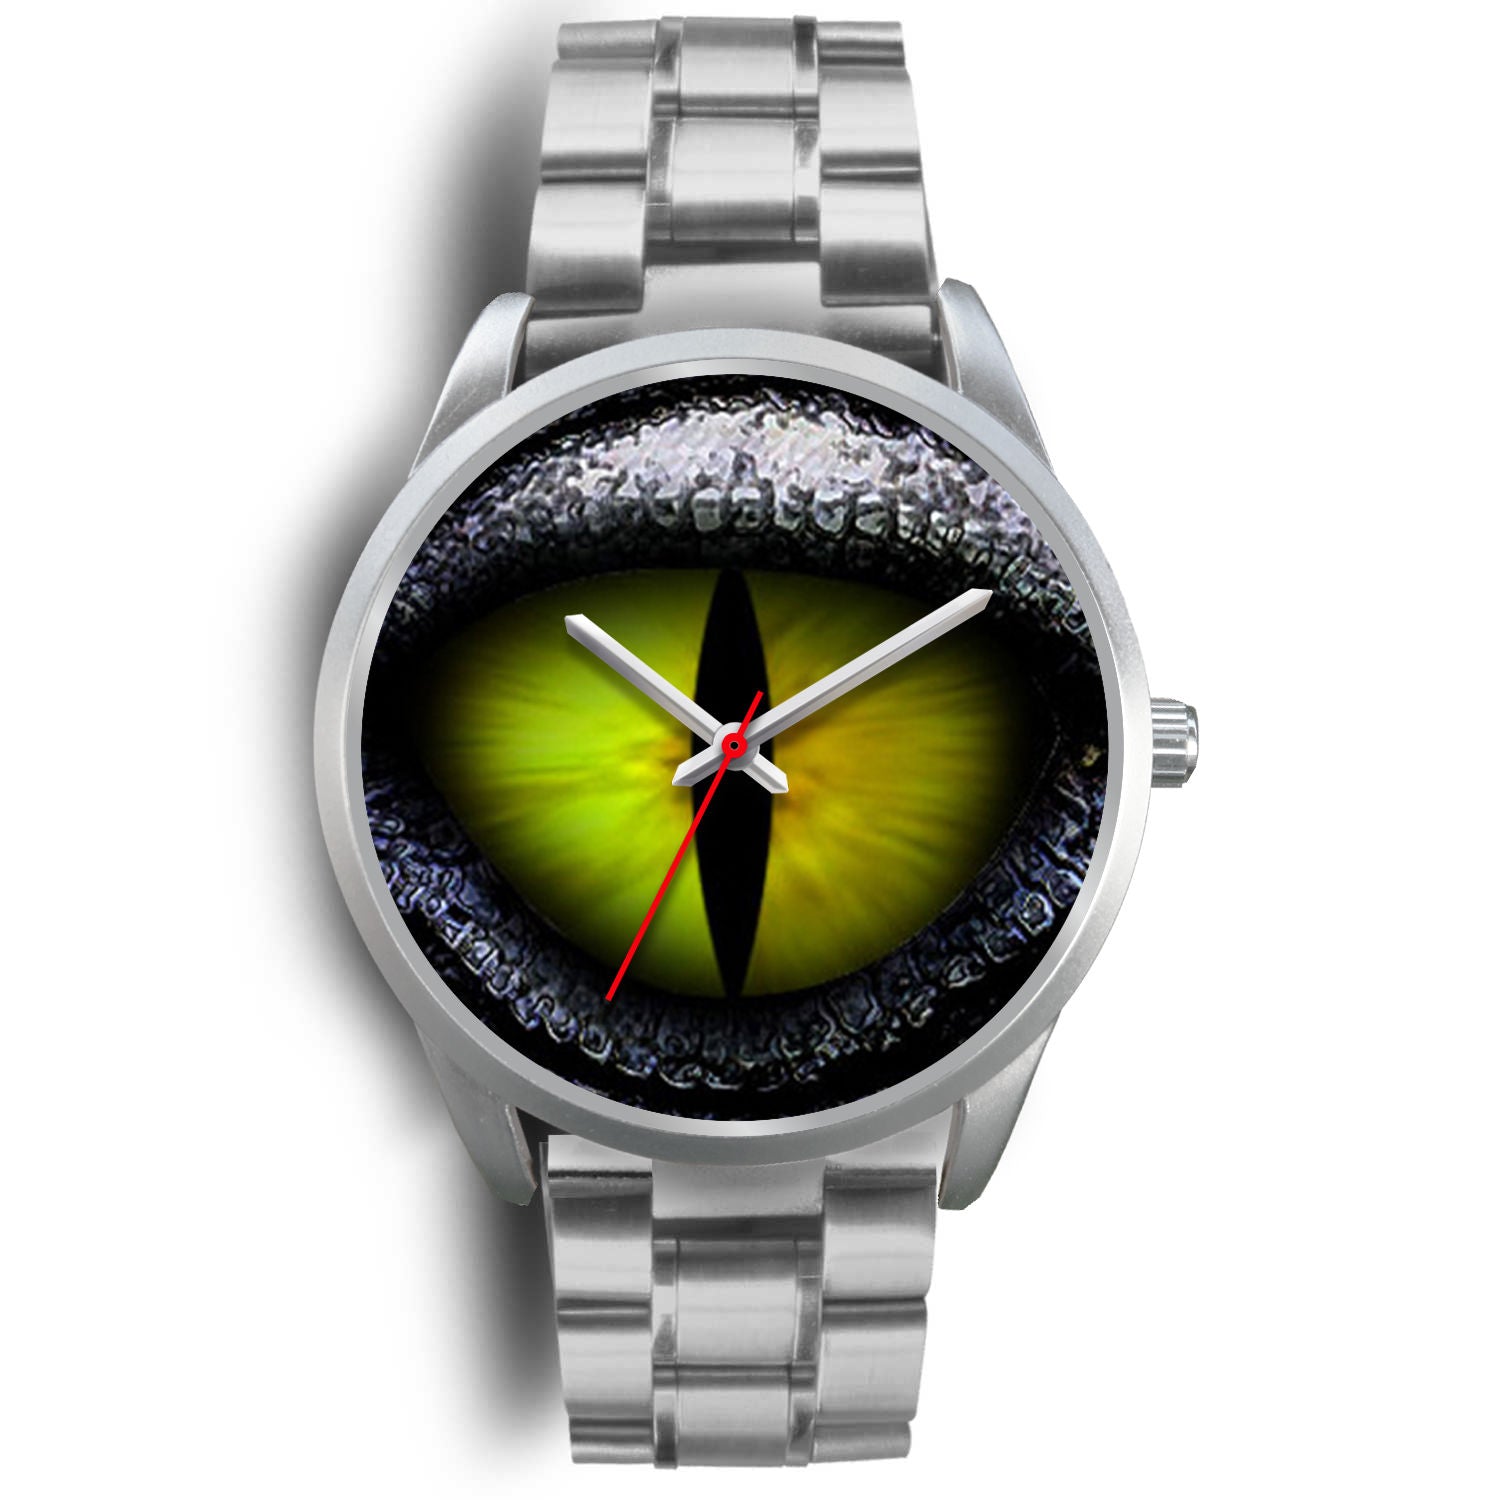 Limited Edition Vintage Inspired Custom Watch Eyes 16.12